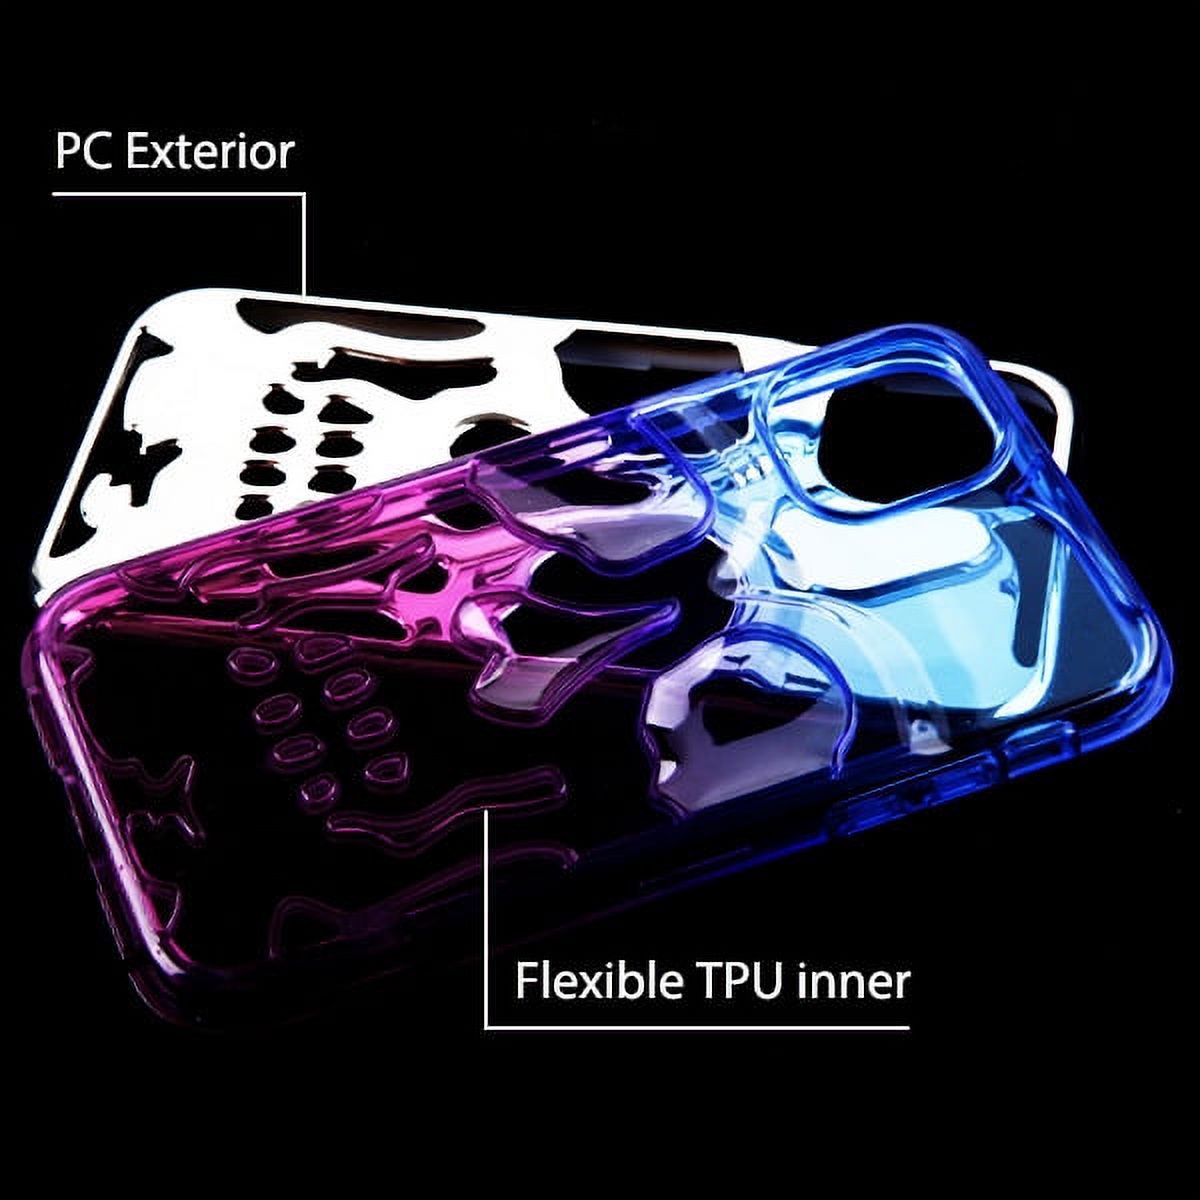 Apple iPhone 11 PRO Phone Case Tuff Hybrid Skeleton Shockproof Armor Impact Rubber Dual Layer Hard Soft TPU Rugged Protective Cover SKULL Blue Purple Silver Plating Phone Cover for Apple iPhone 11 Pro - image 2 of 5